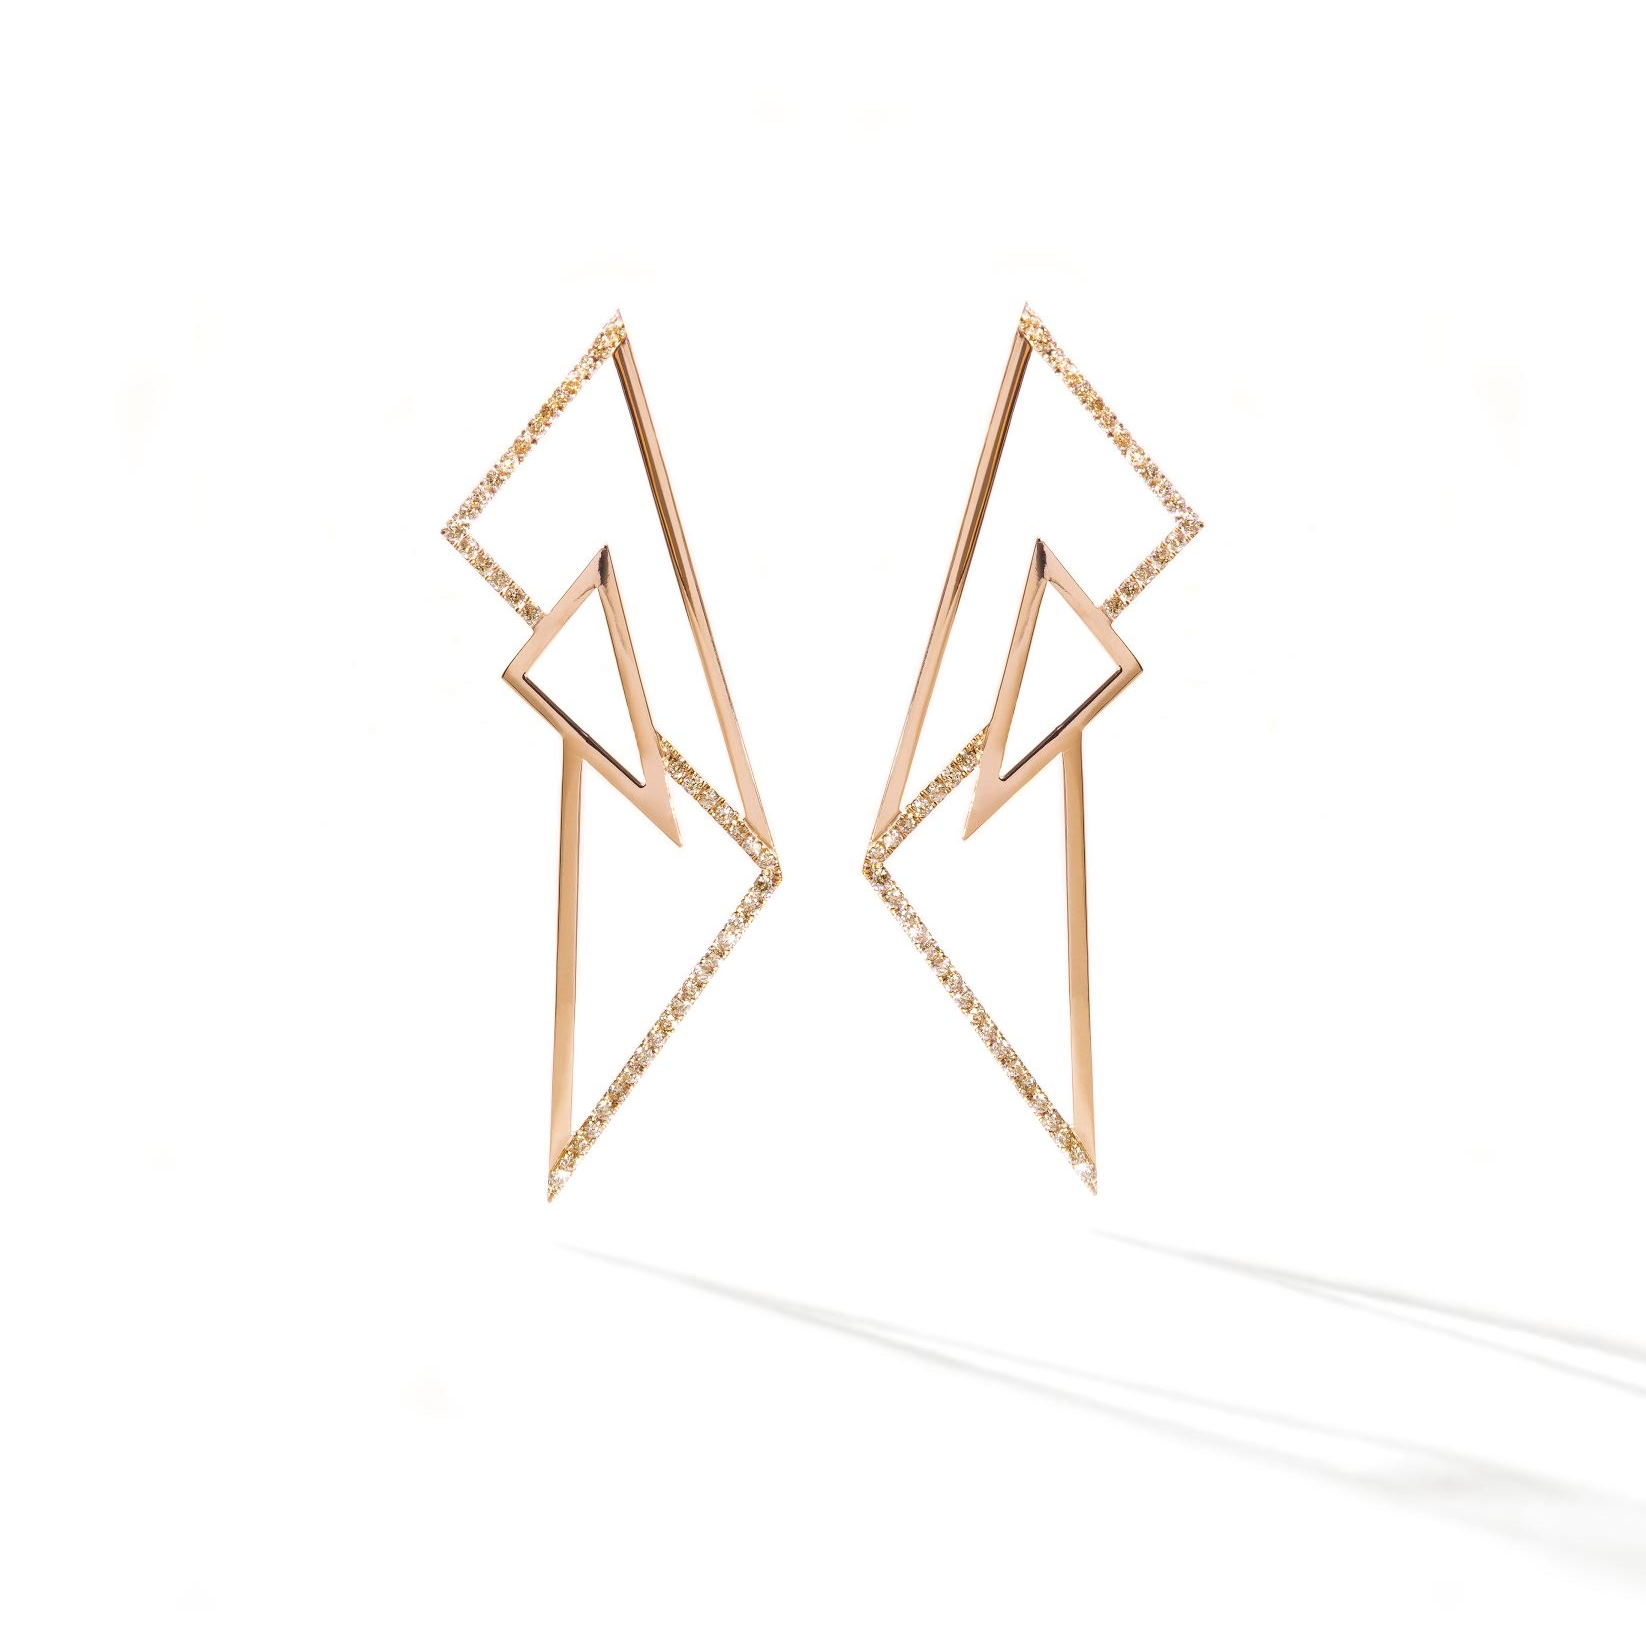 'Kinetic' Earrings: The first piece Sophie designed